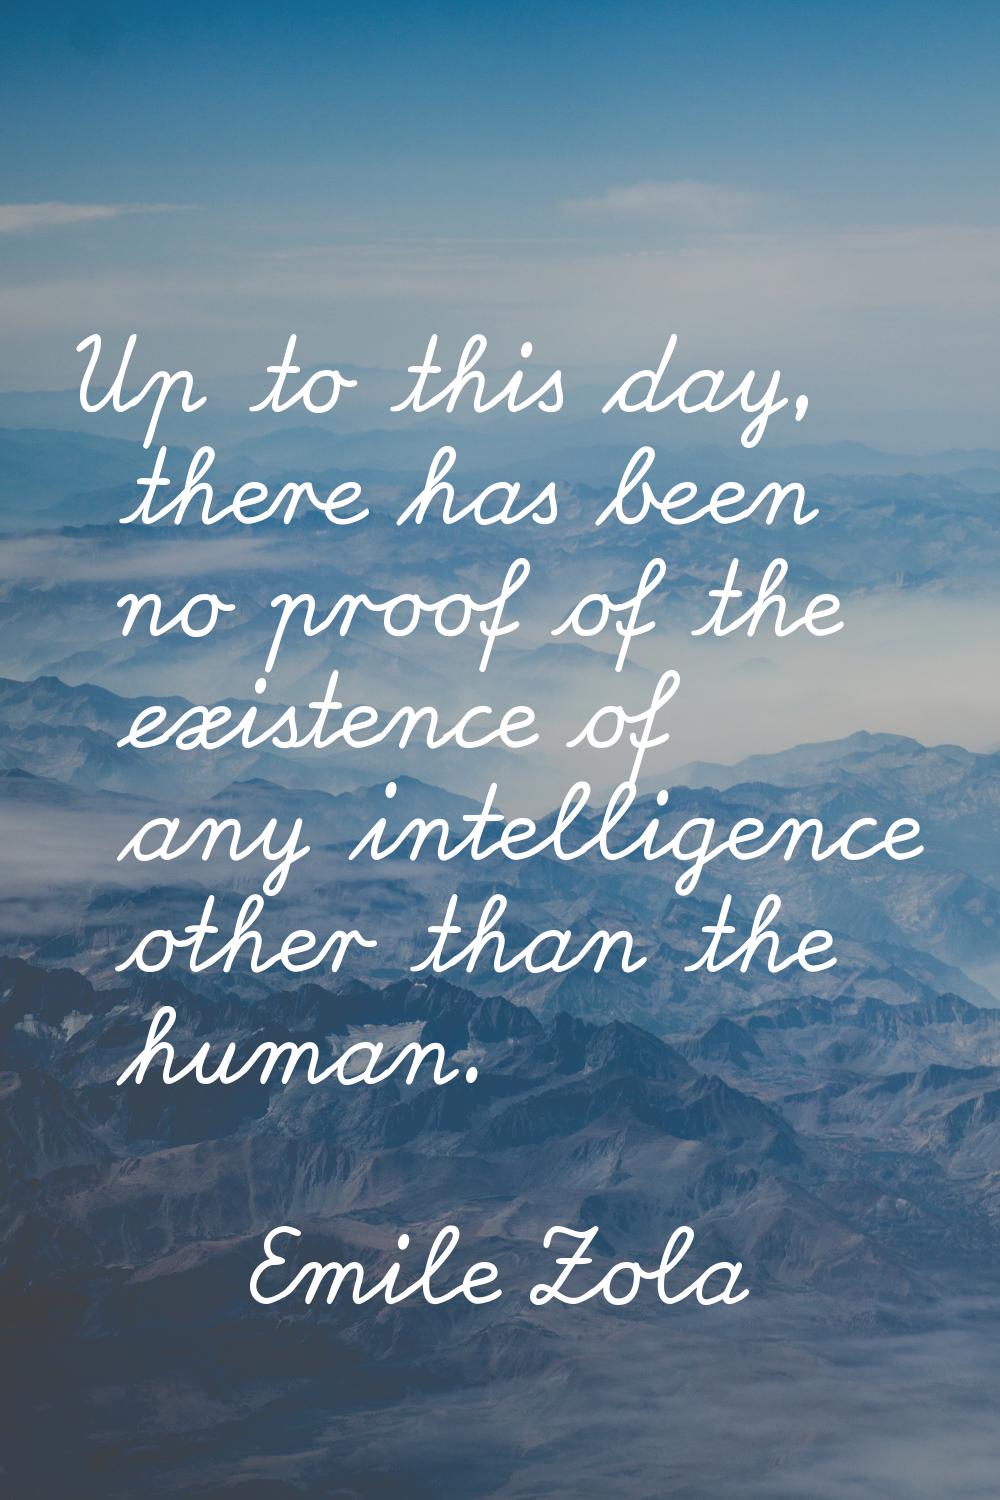 Up to this day, there has been no proof of the existence of any intelligence other than the human.